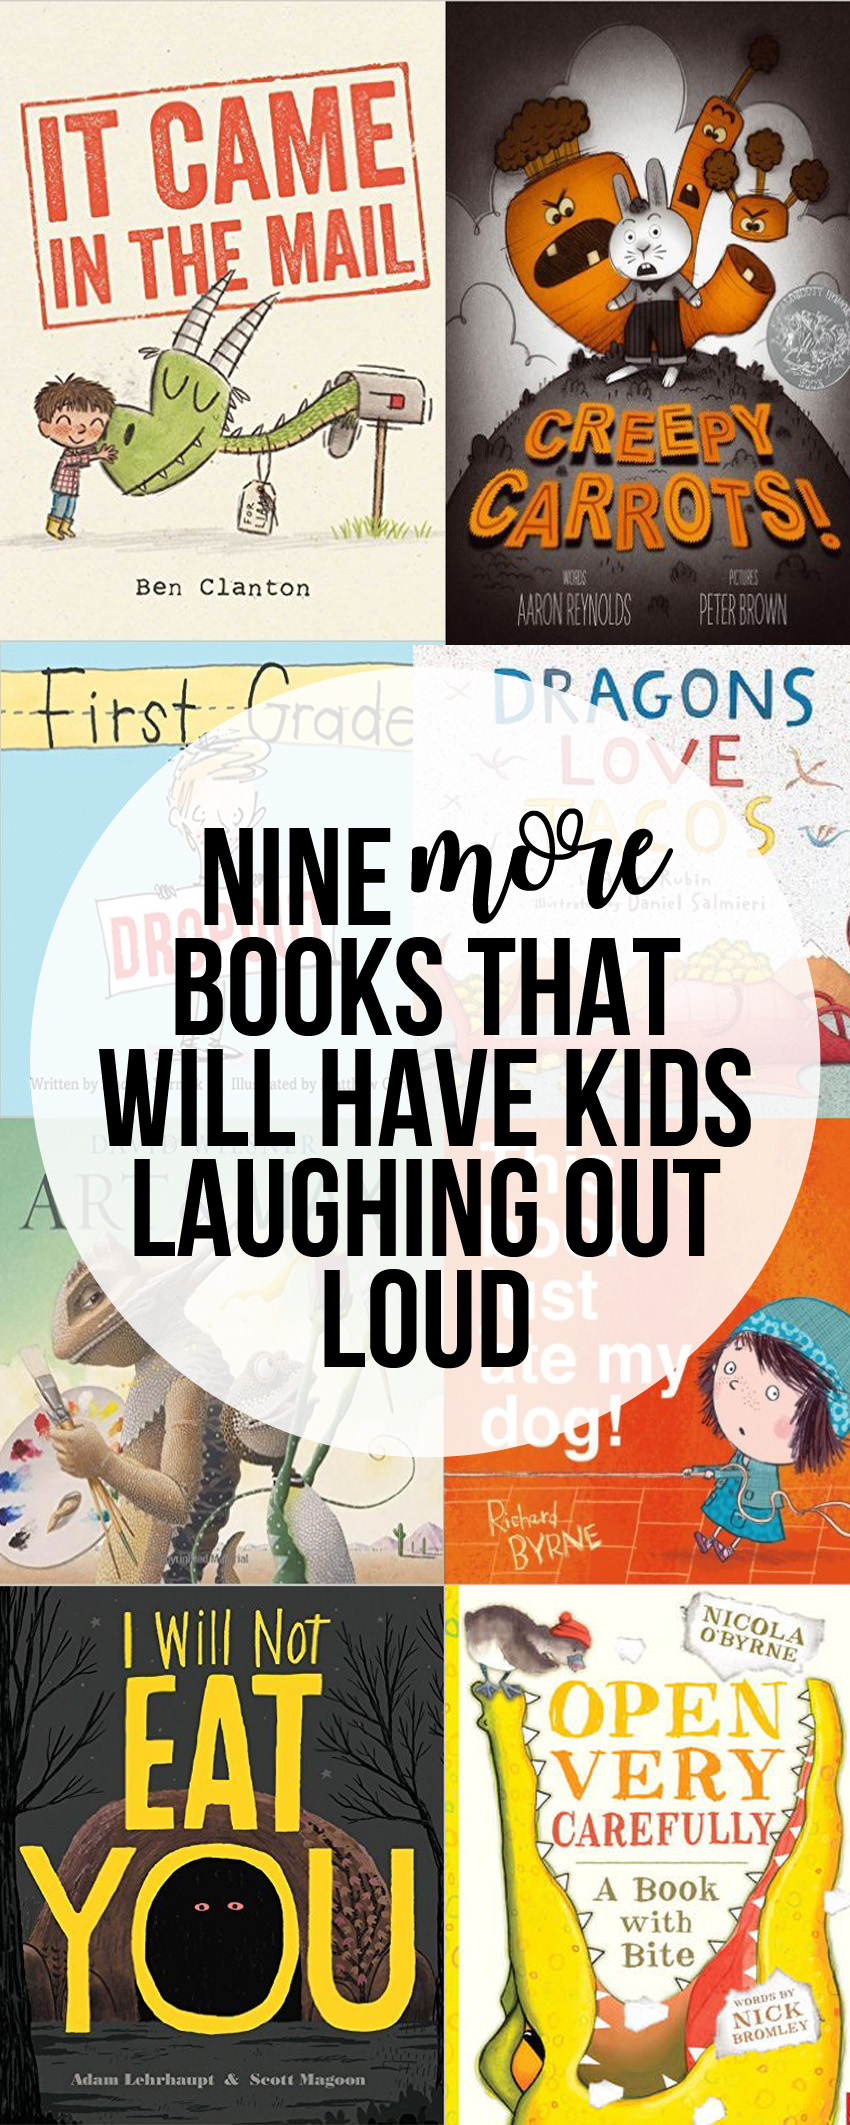 More Funny Picture Books That Will Have Kids Laughing Out Loud